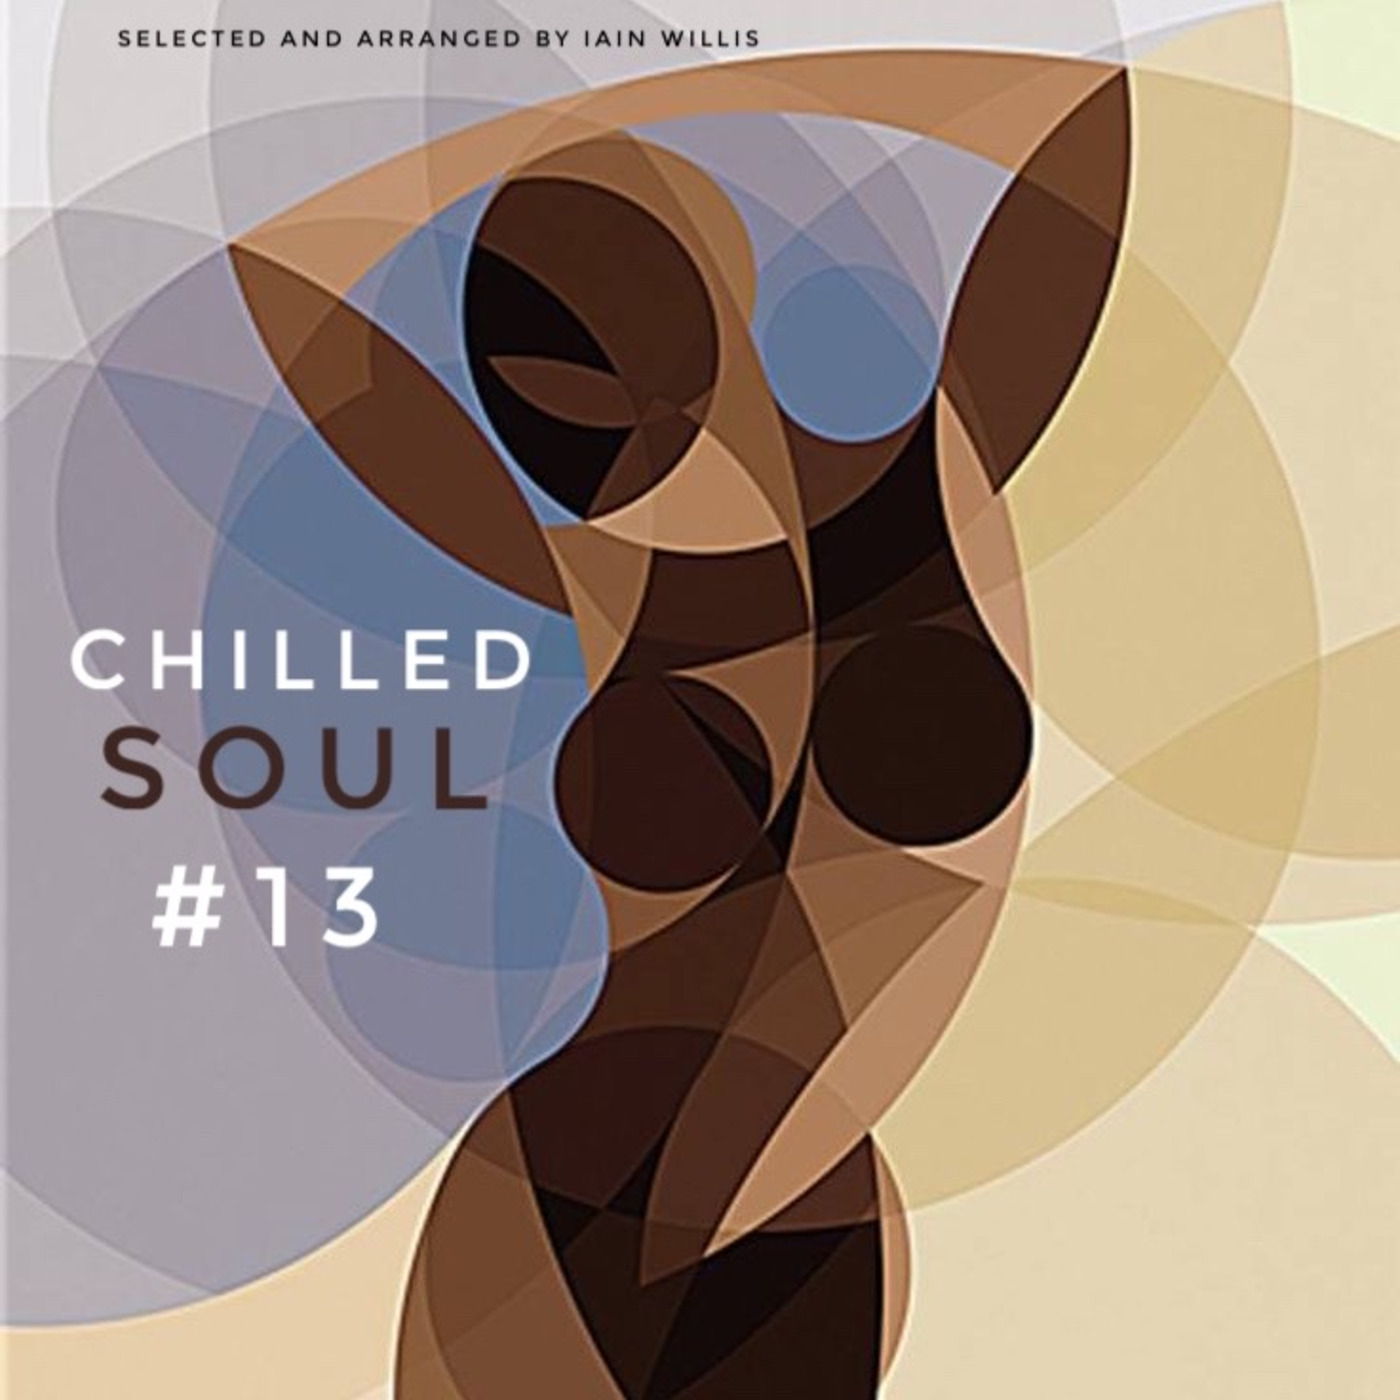 Chilled Soul #13 - Iain Willis